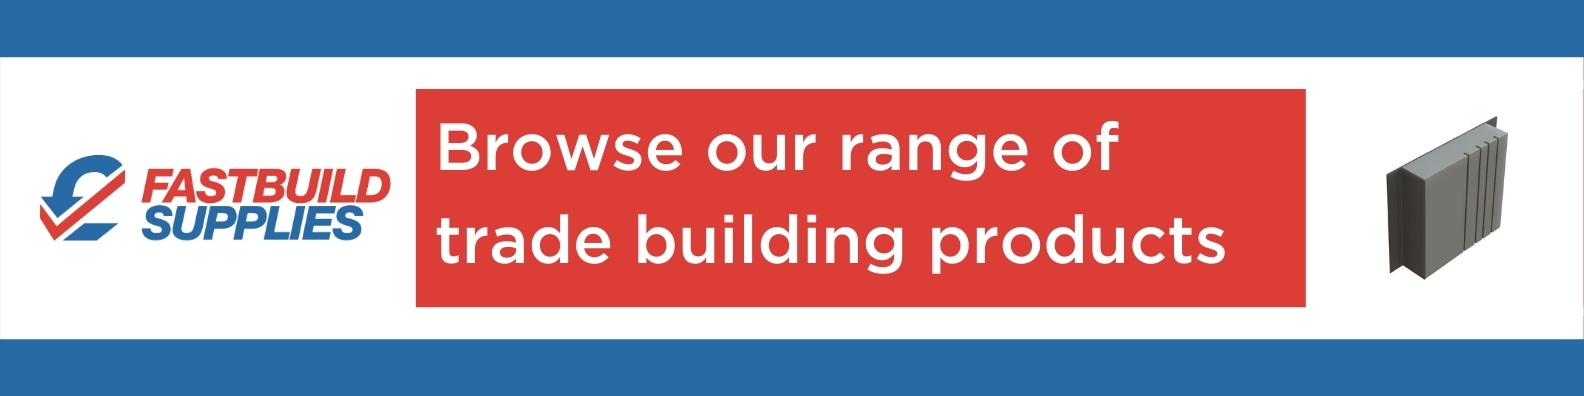 Browse our range of trade building products at Fastbuild